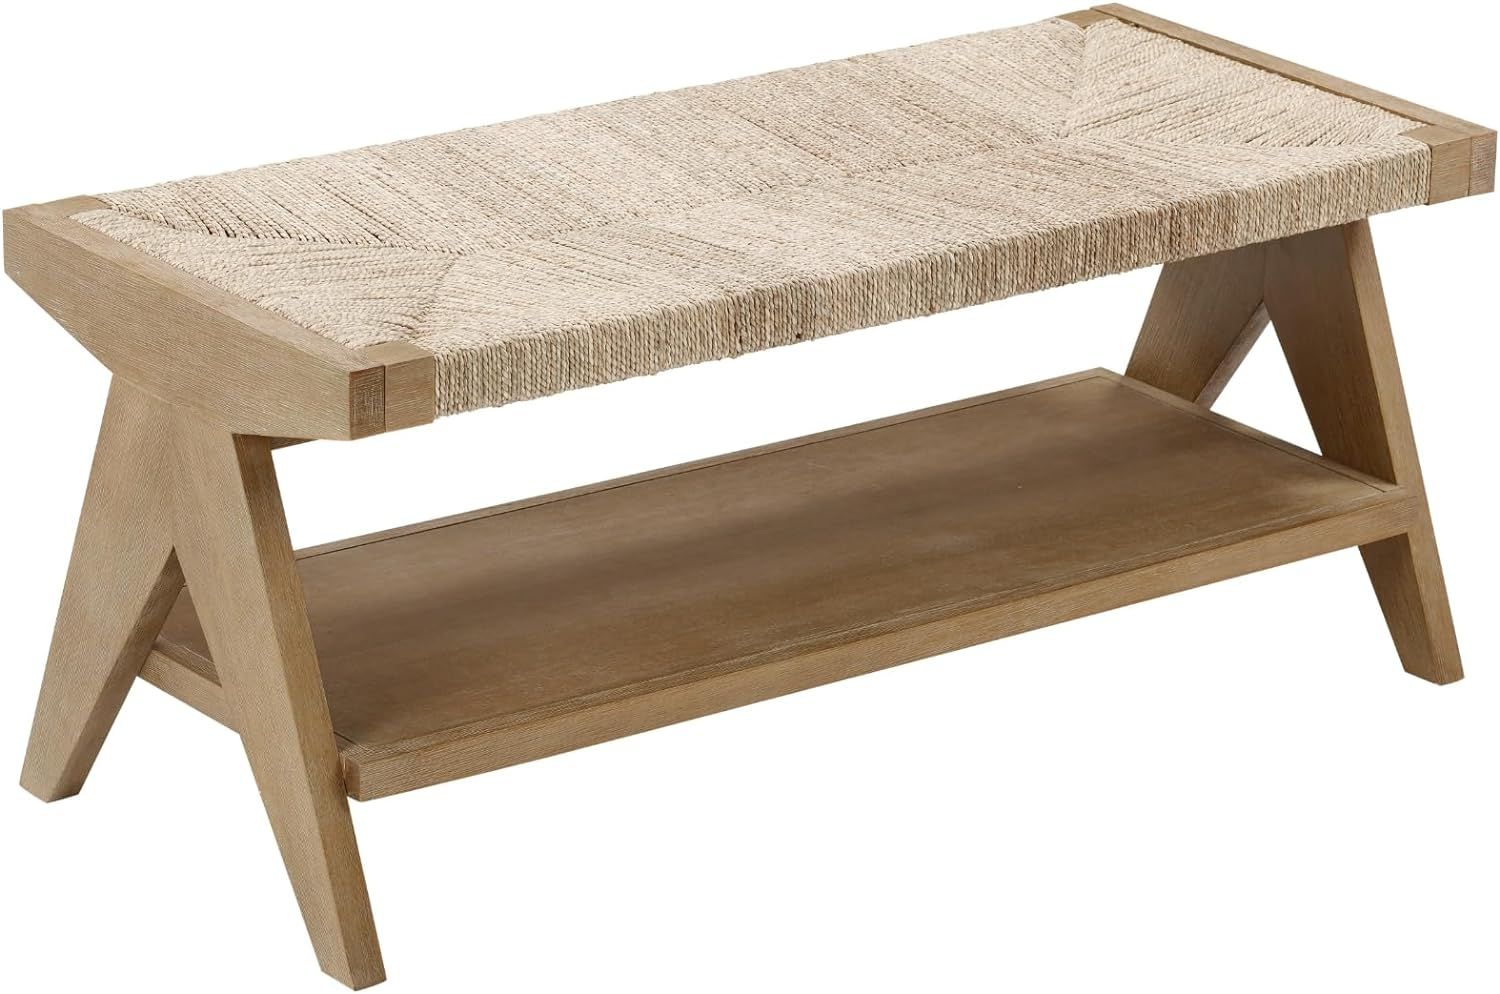 Nathan James Beacon Mid-Century Wood Entryway Bench Seat, Brushed Light Brown/Seagrass | Amazon (US)